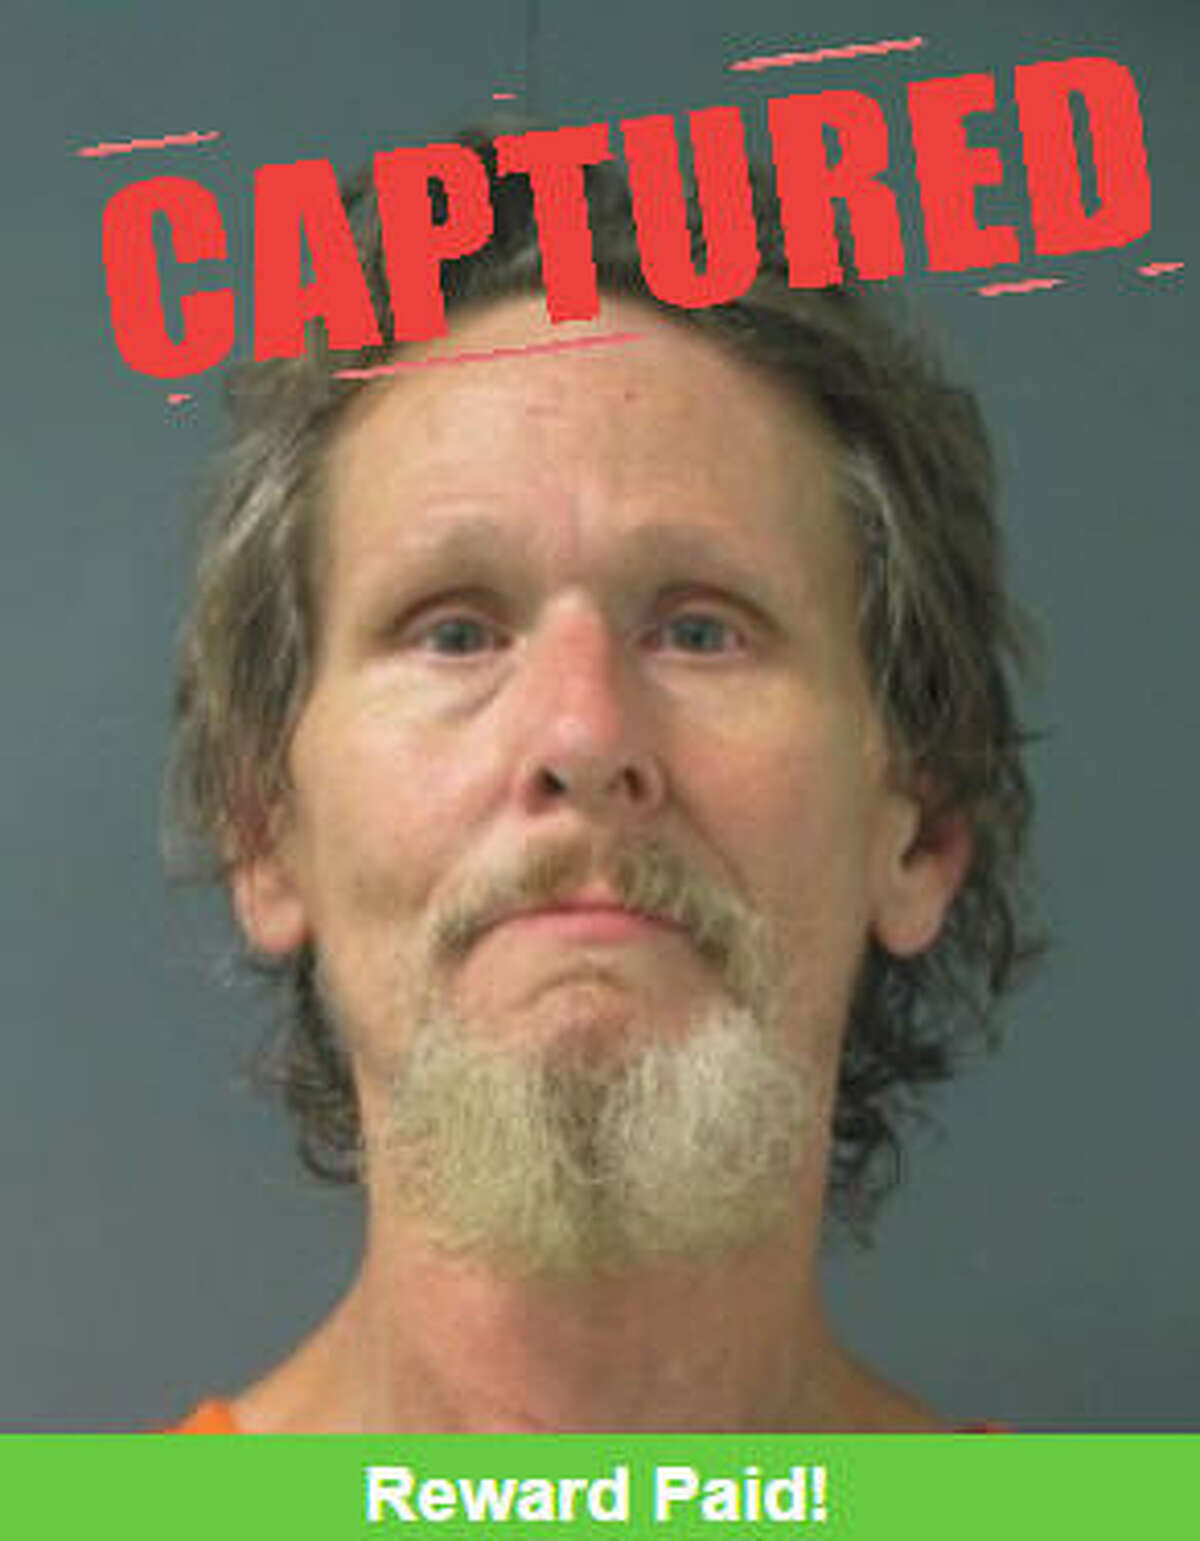 Billy Wayne Gilliland, 58, one of Texas' 10 most wanted fugitives, was arrested Friday, April 14, 2017, in east Harris County.